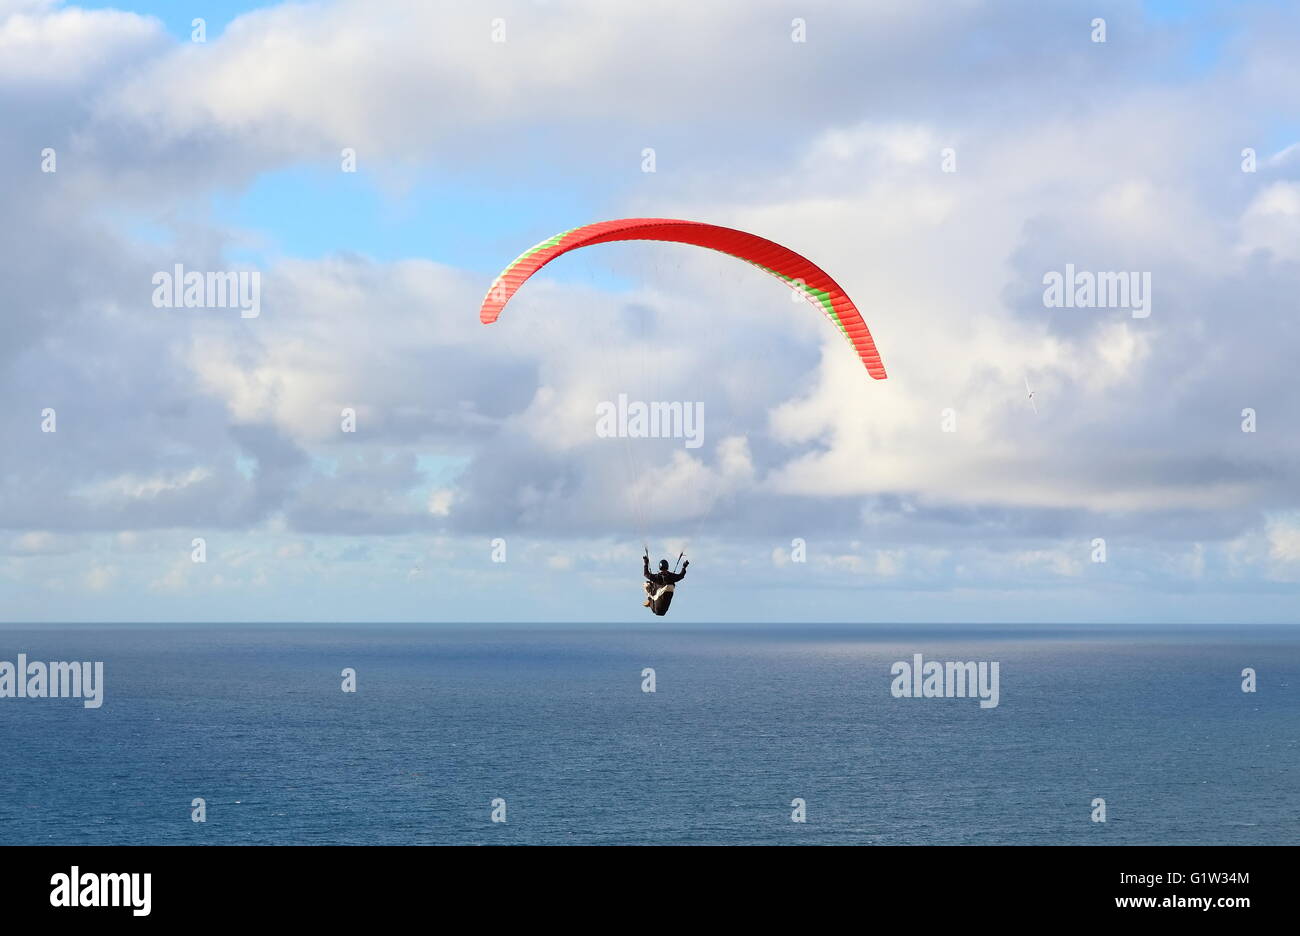 Hang Glider – Hang Glider flying in the sky on a bright blue day Stock Photo